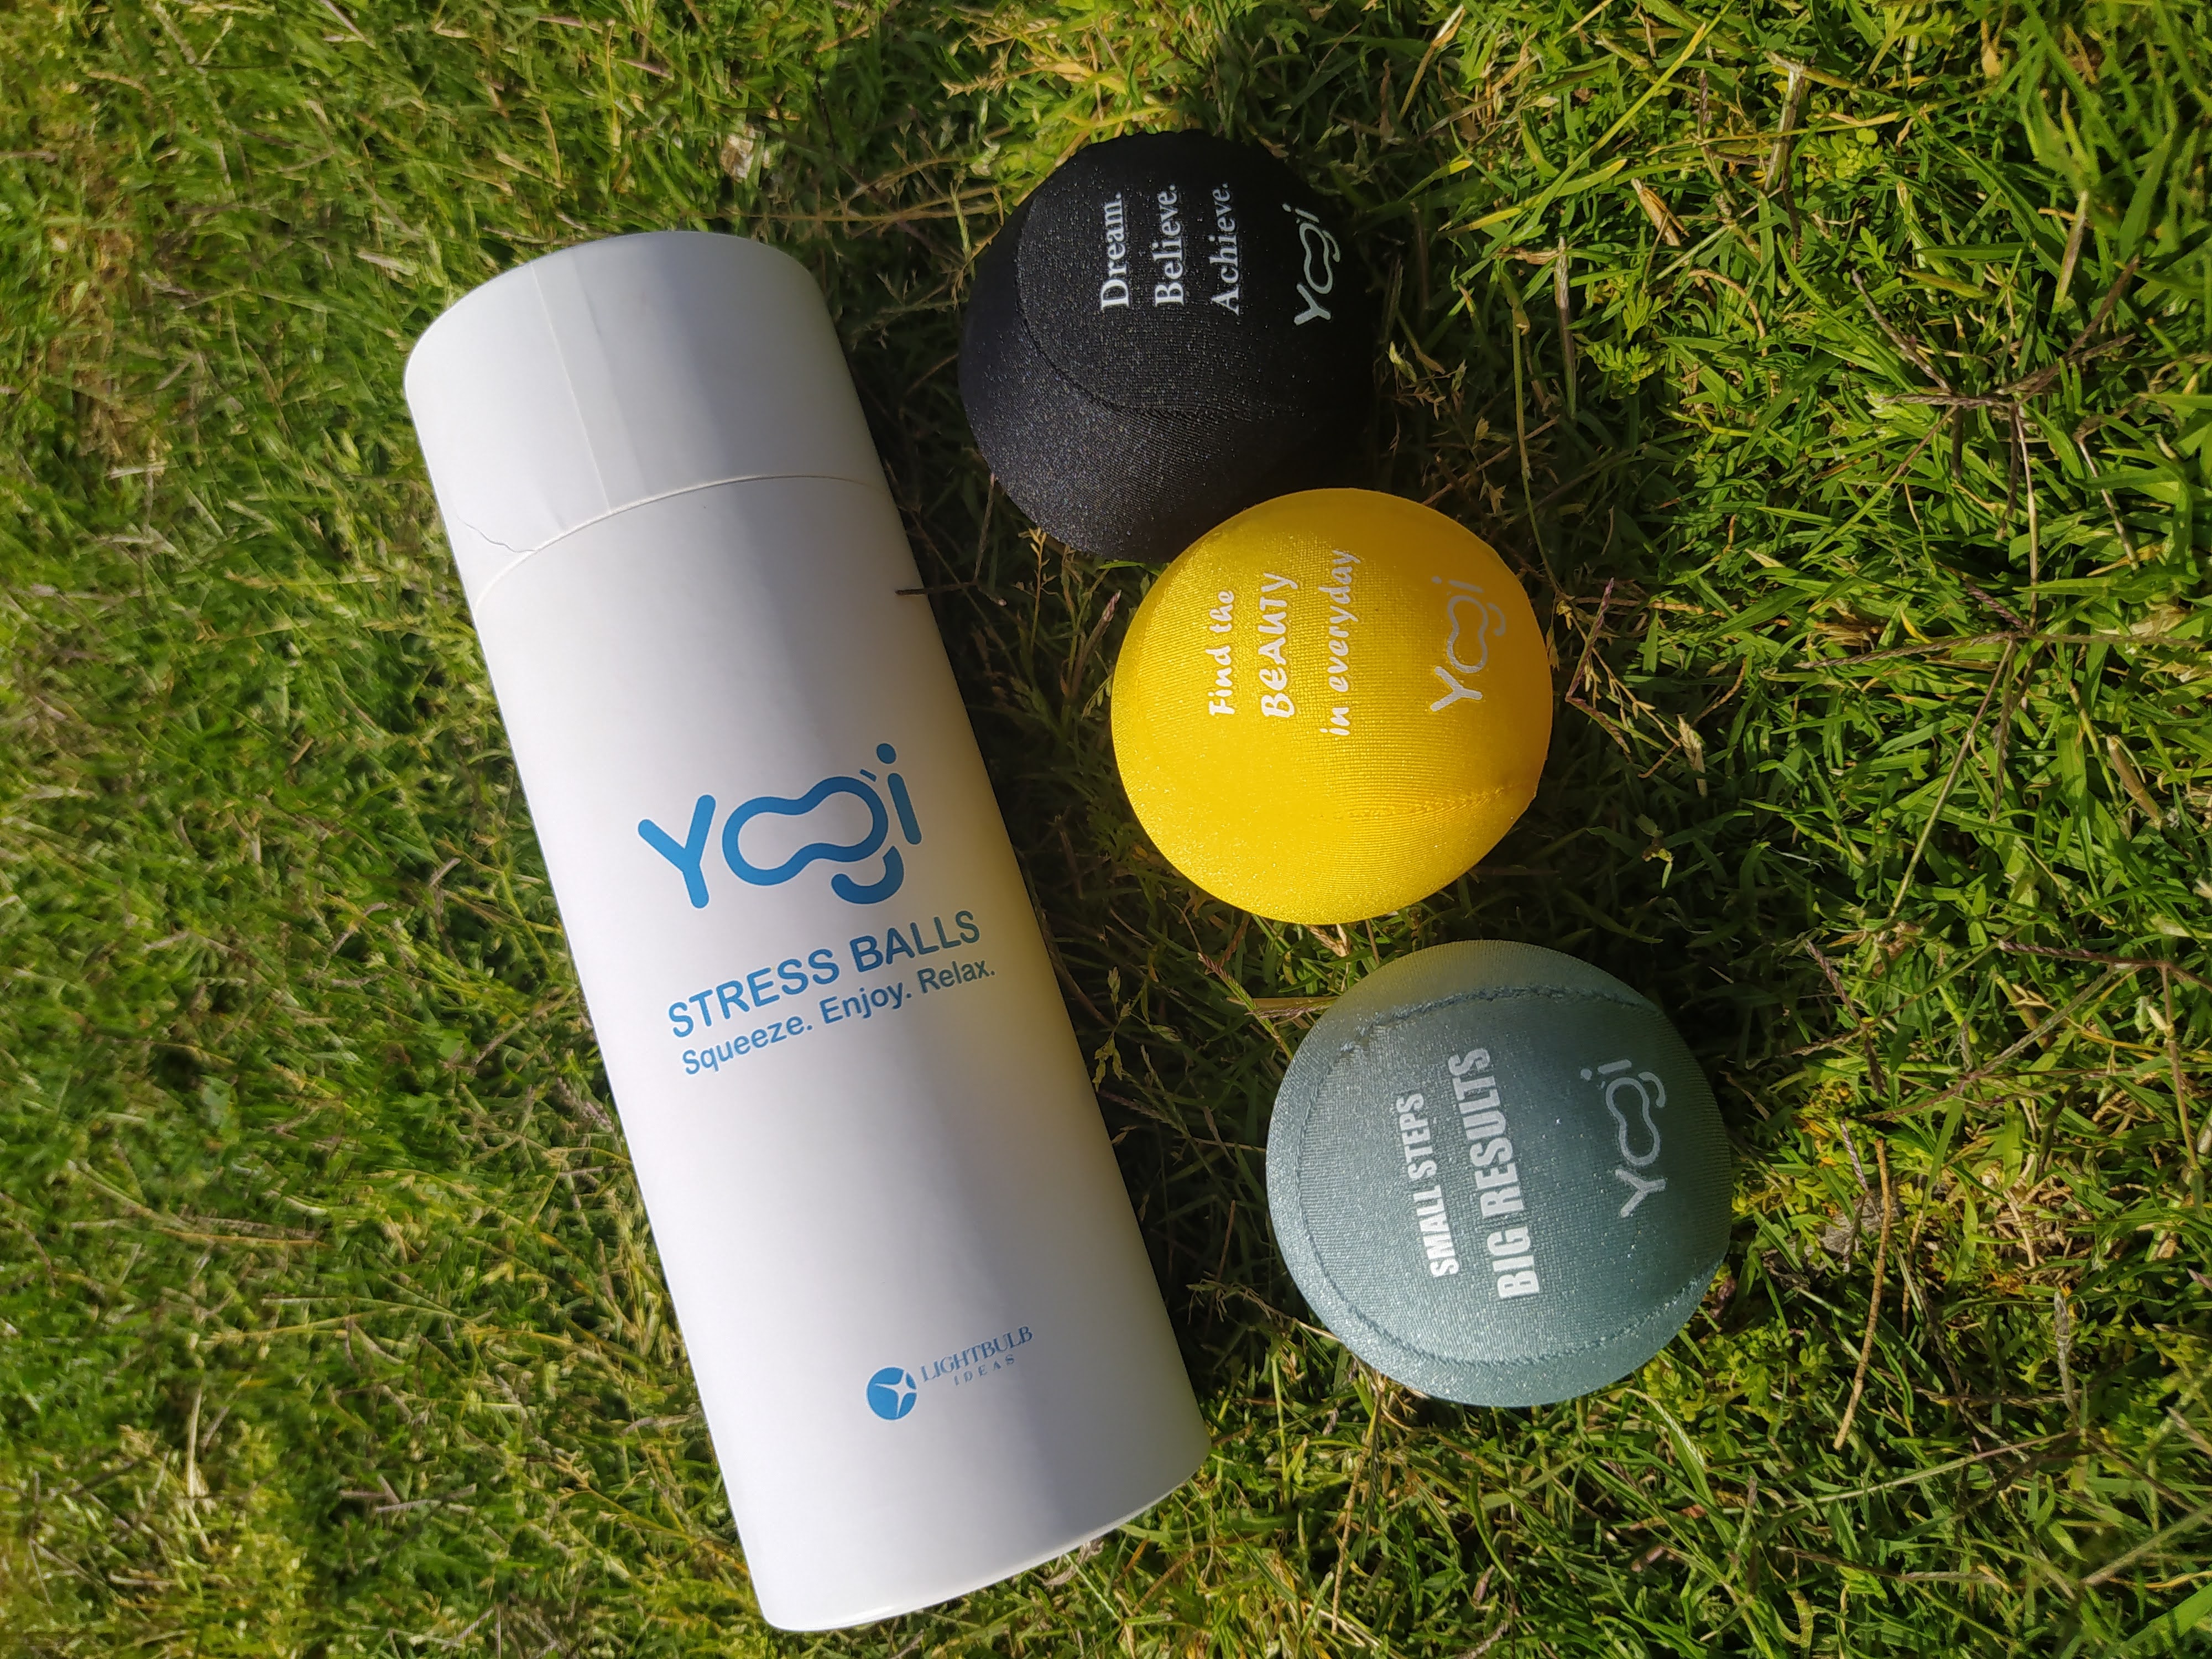 Yogi Stress Balls, fidget toy for Hands Therapy, three resistance levels